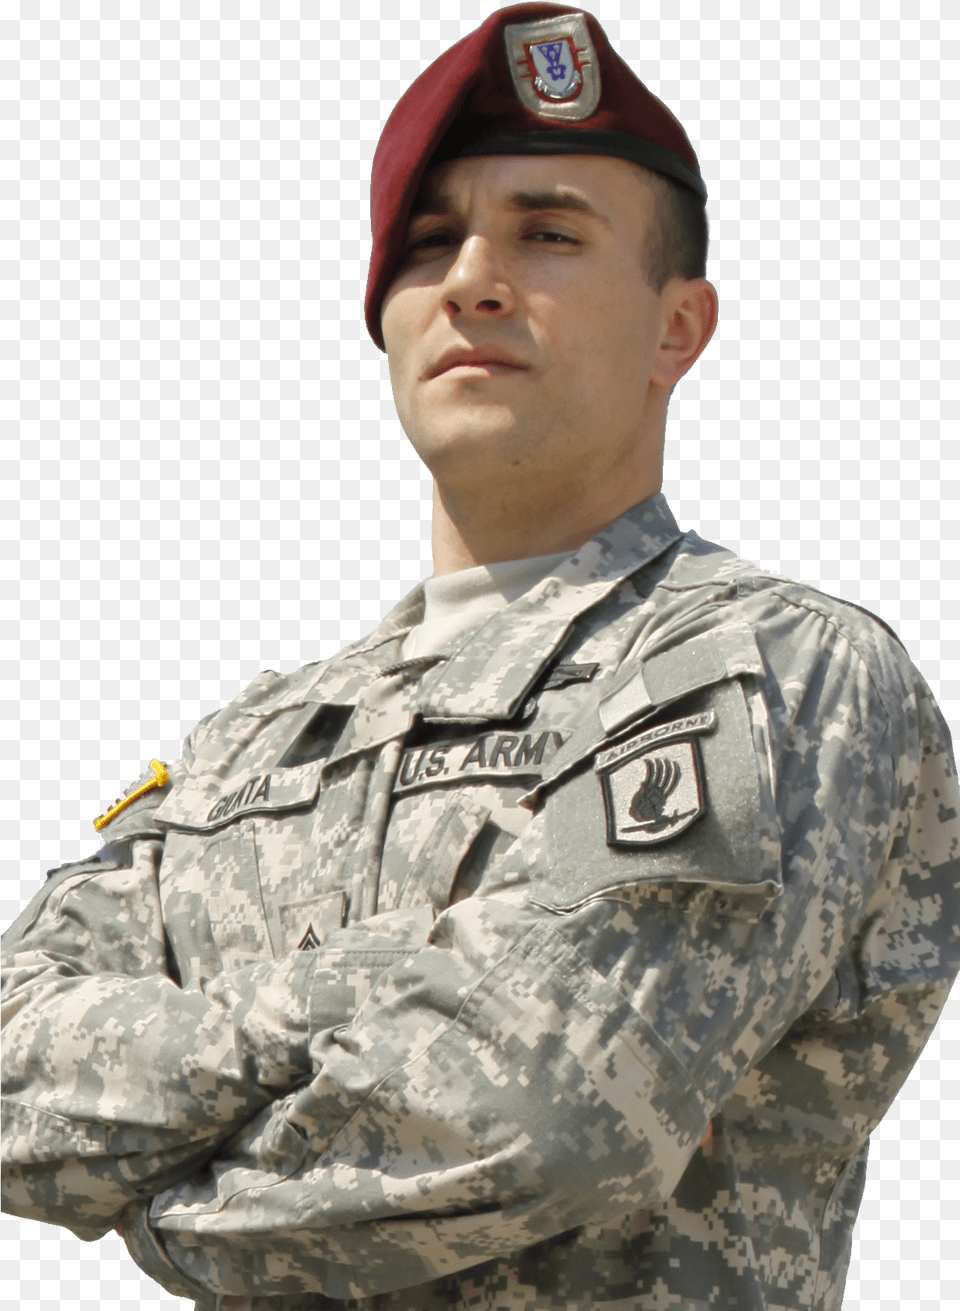 Staff Sgt Salvatore Giunta, Adult, Person, Military Uniform, Military Free Transparent Png